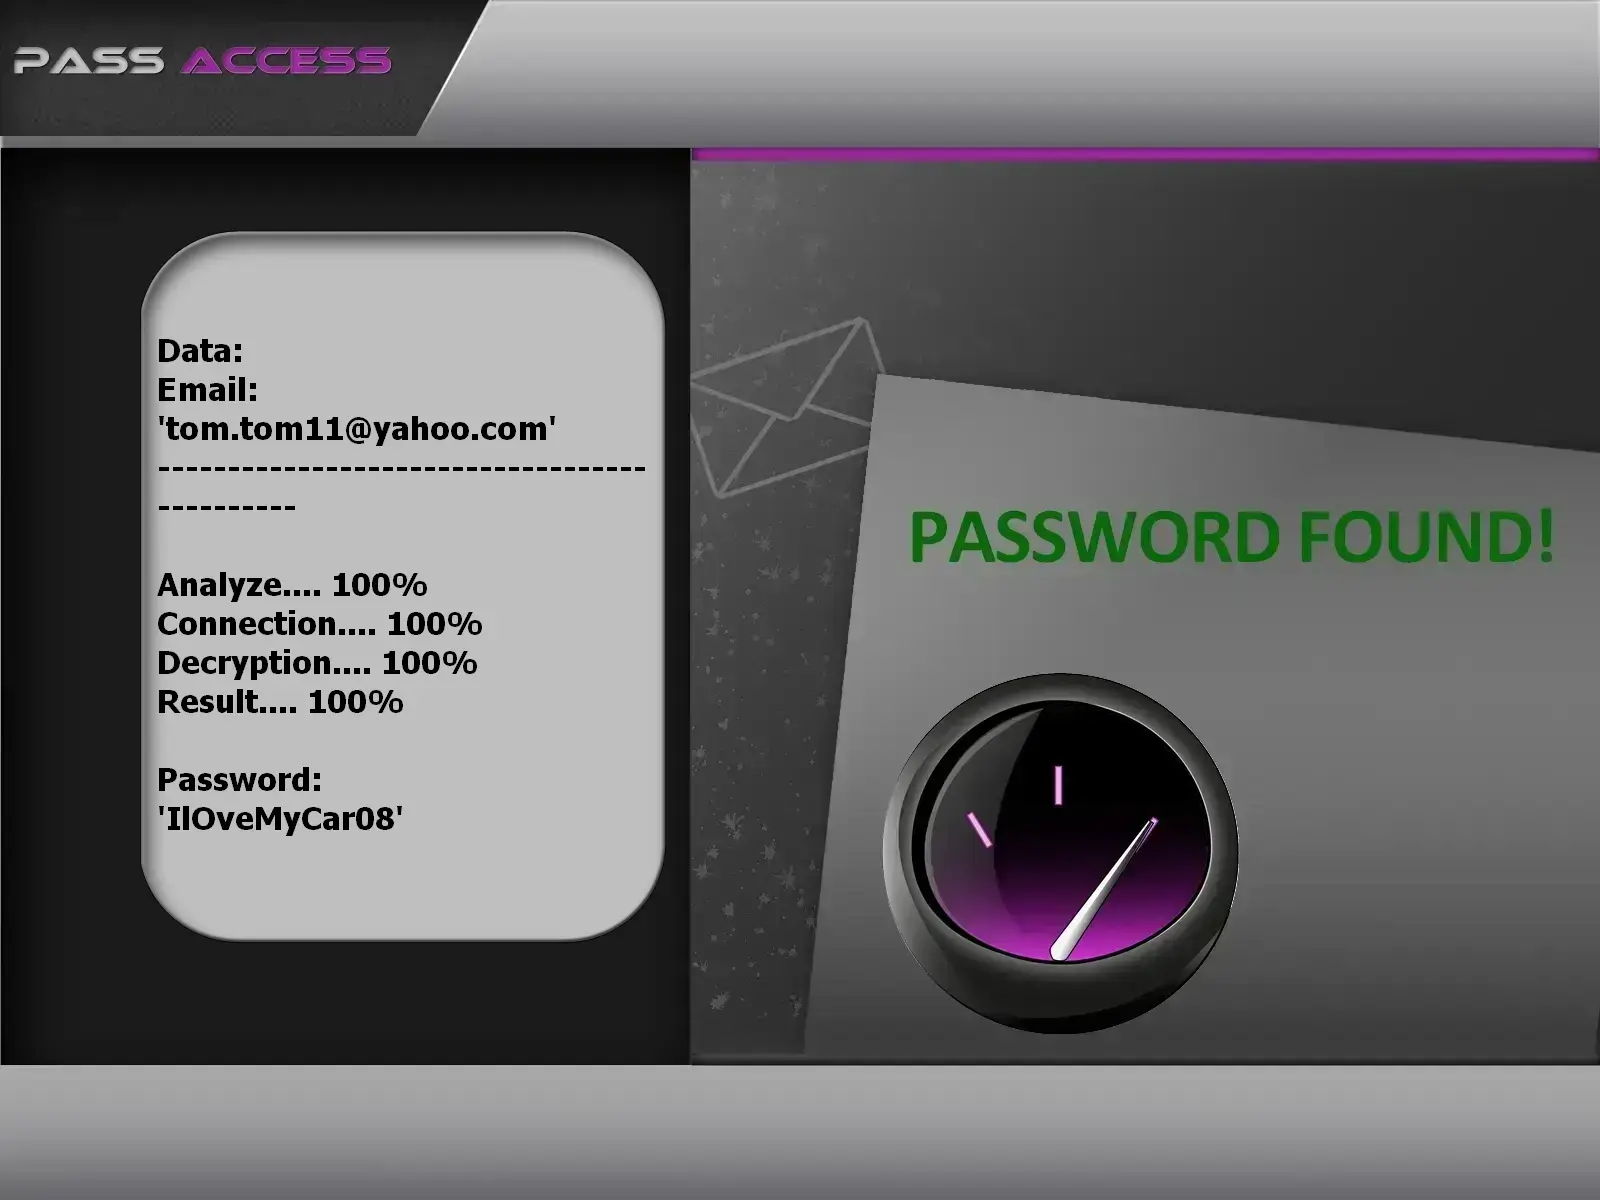 Find a Yahoo! password